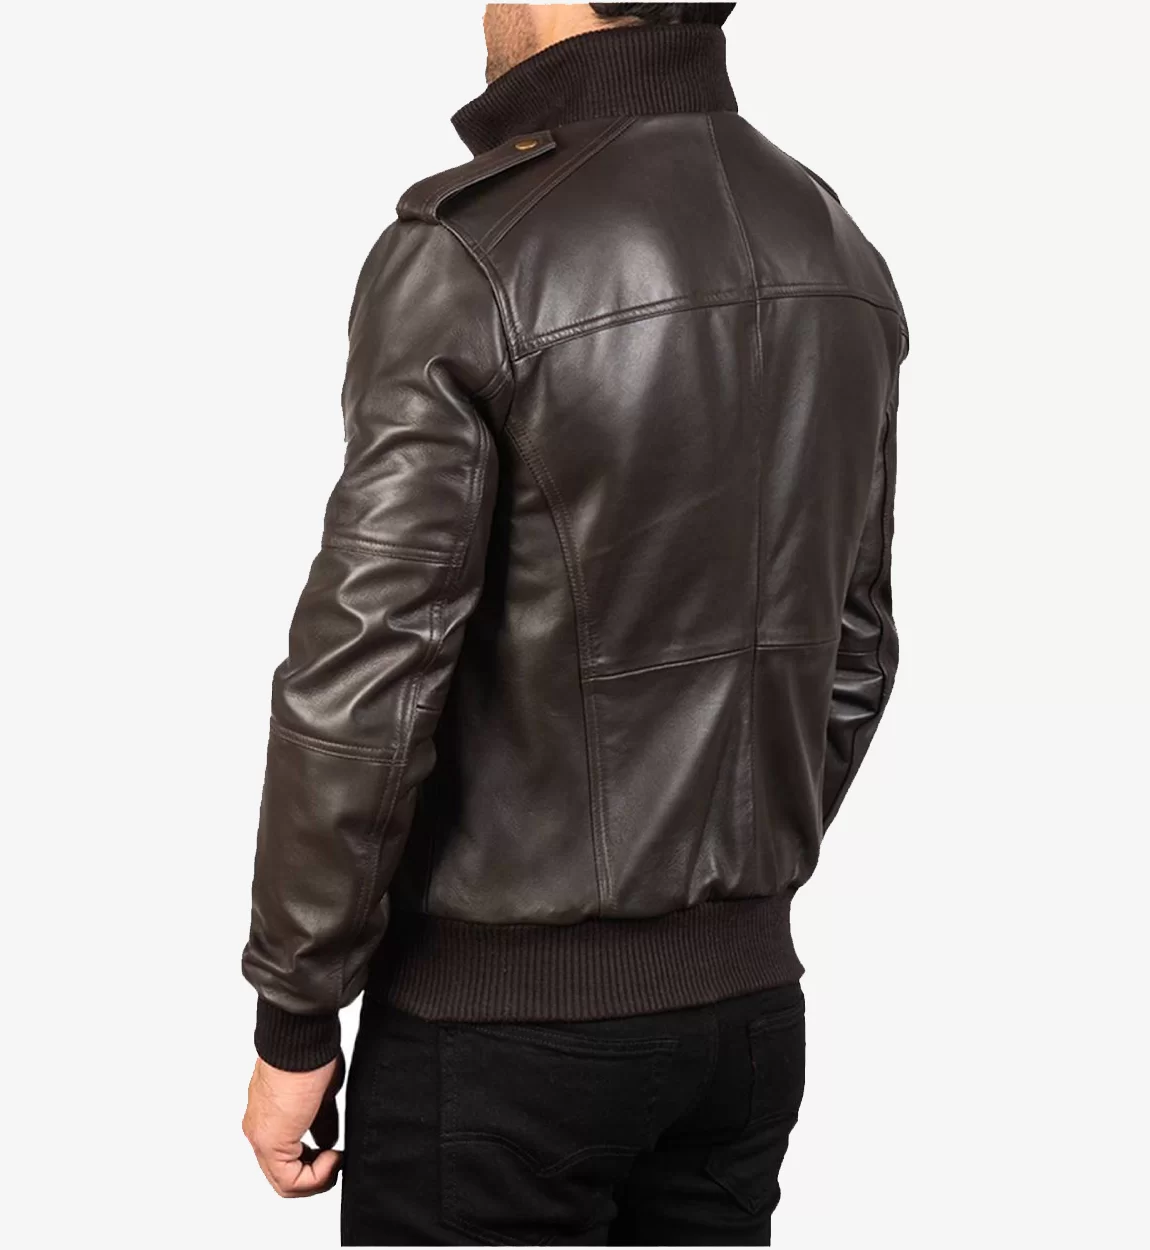 Mens-Shadow-Brown-Real-Bomber-Leather-Jacket1.webp